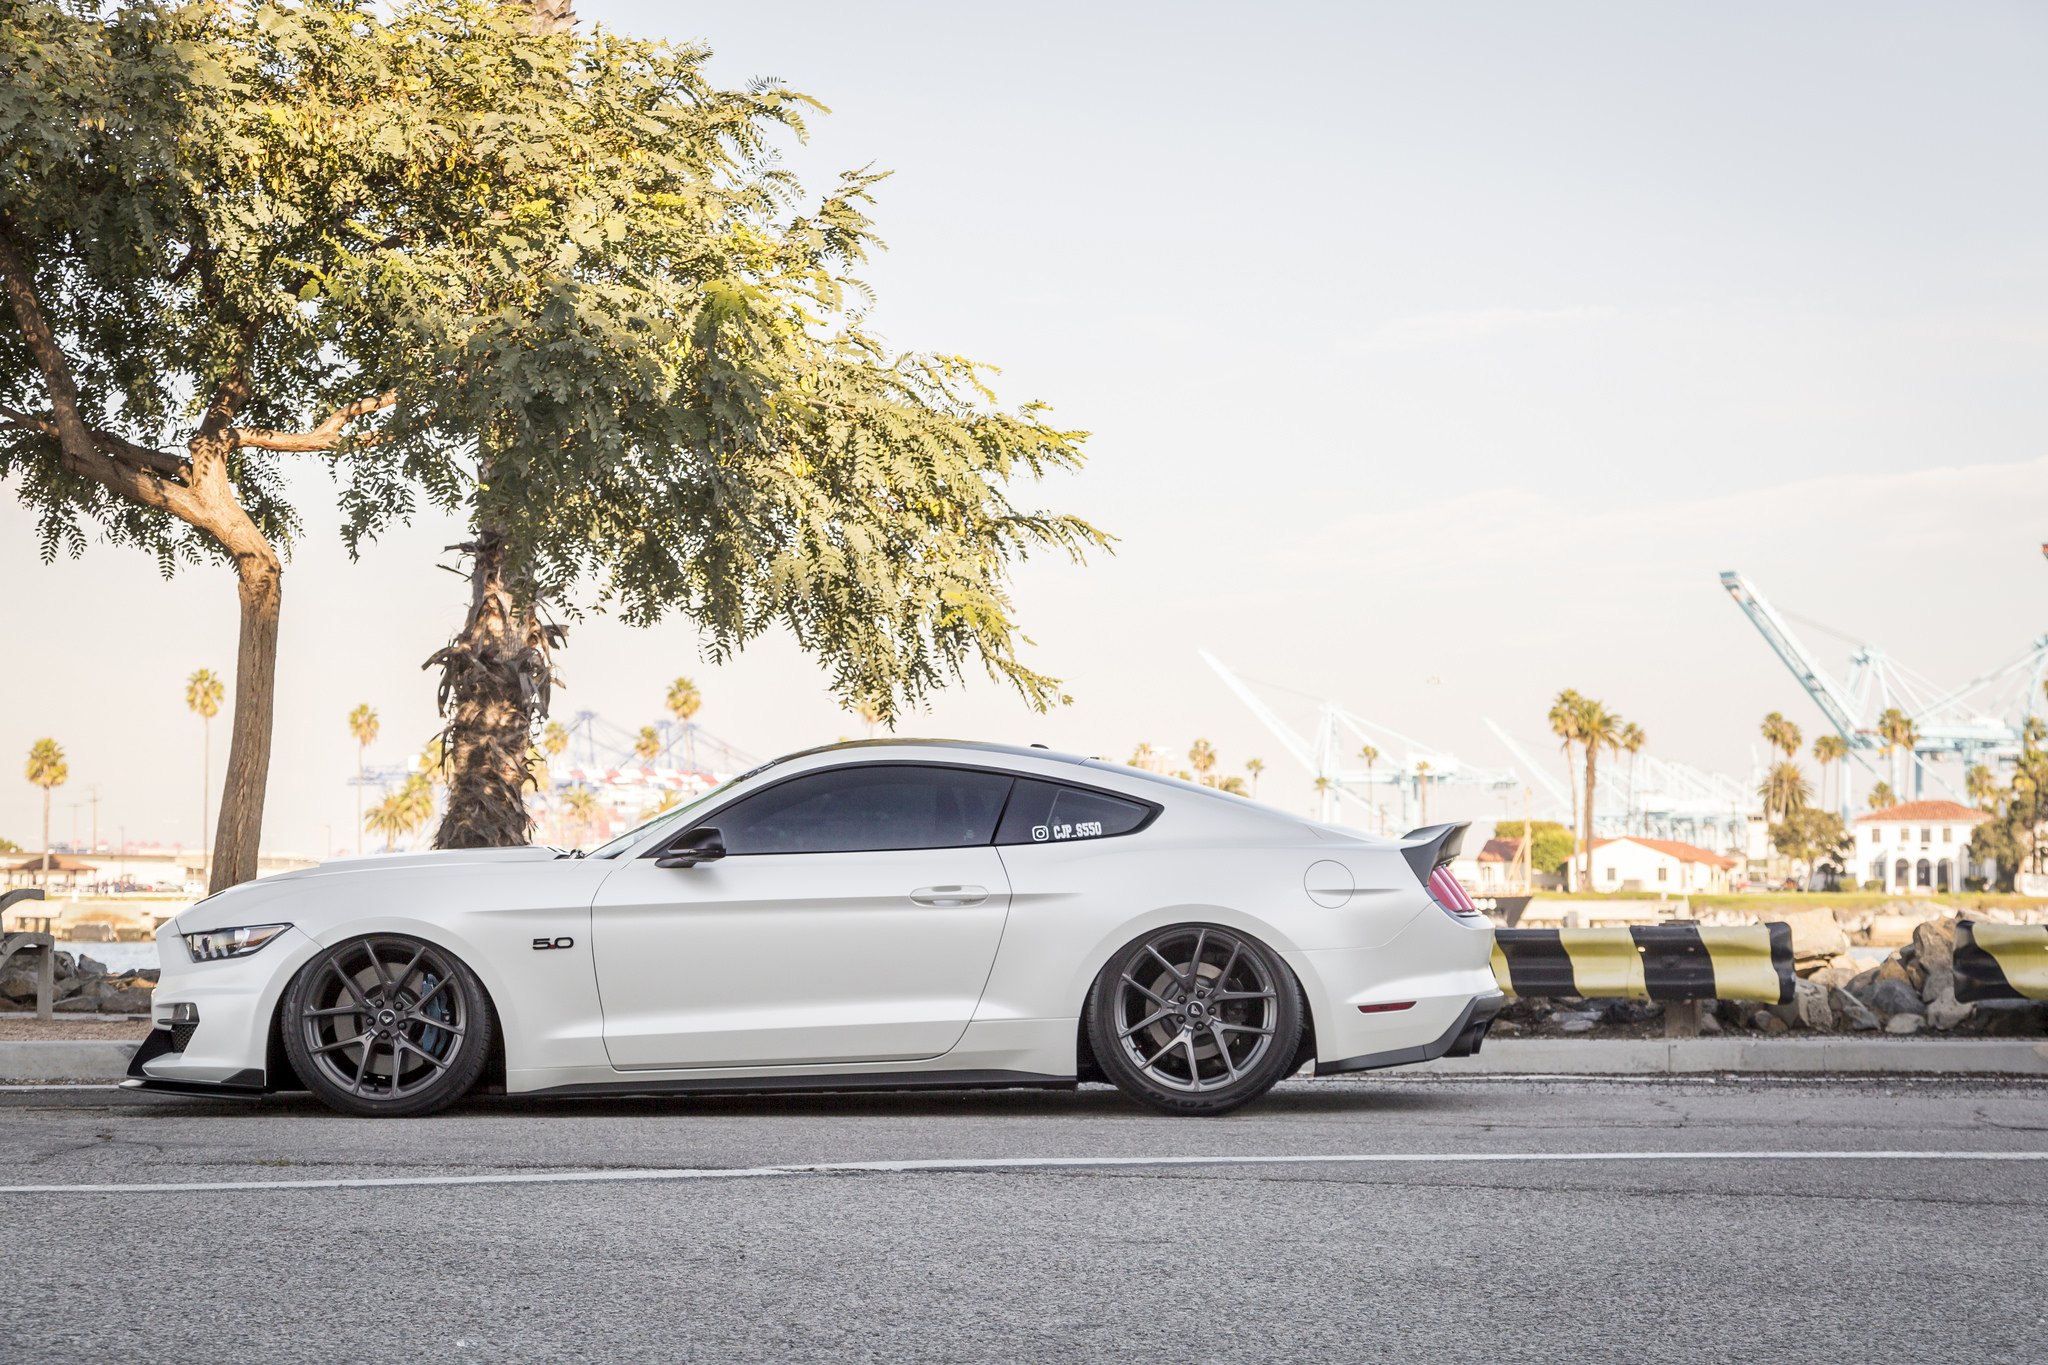 Aftermarket Side Skirts on White Ford Mustang 5.0 - Photo by Boden Autohaus